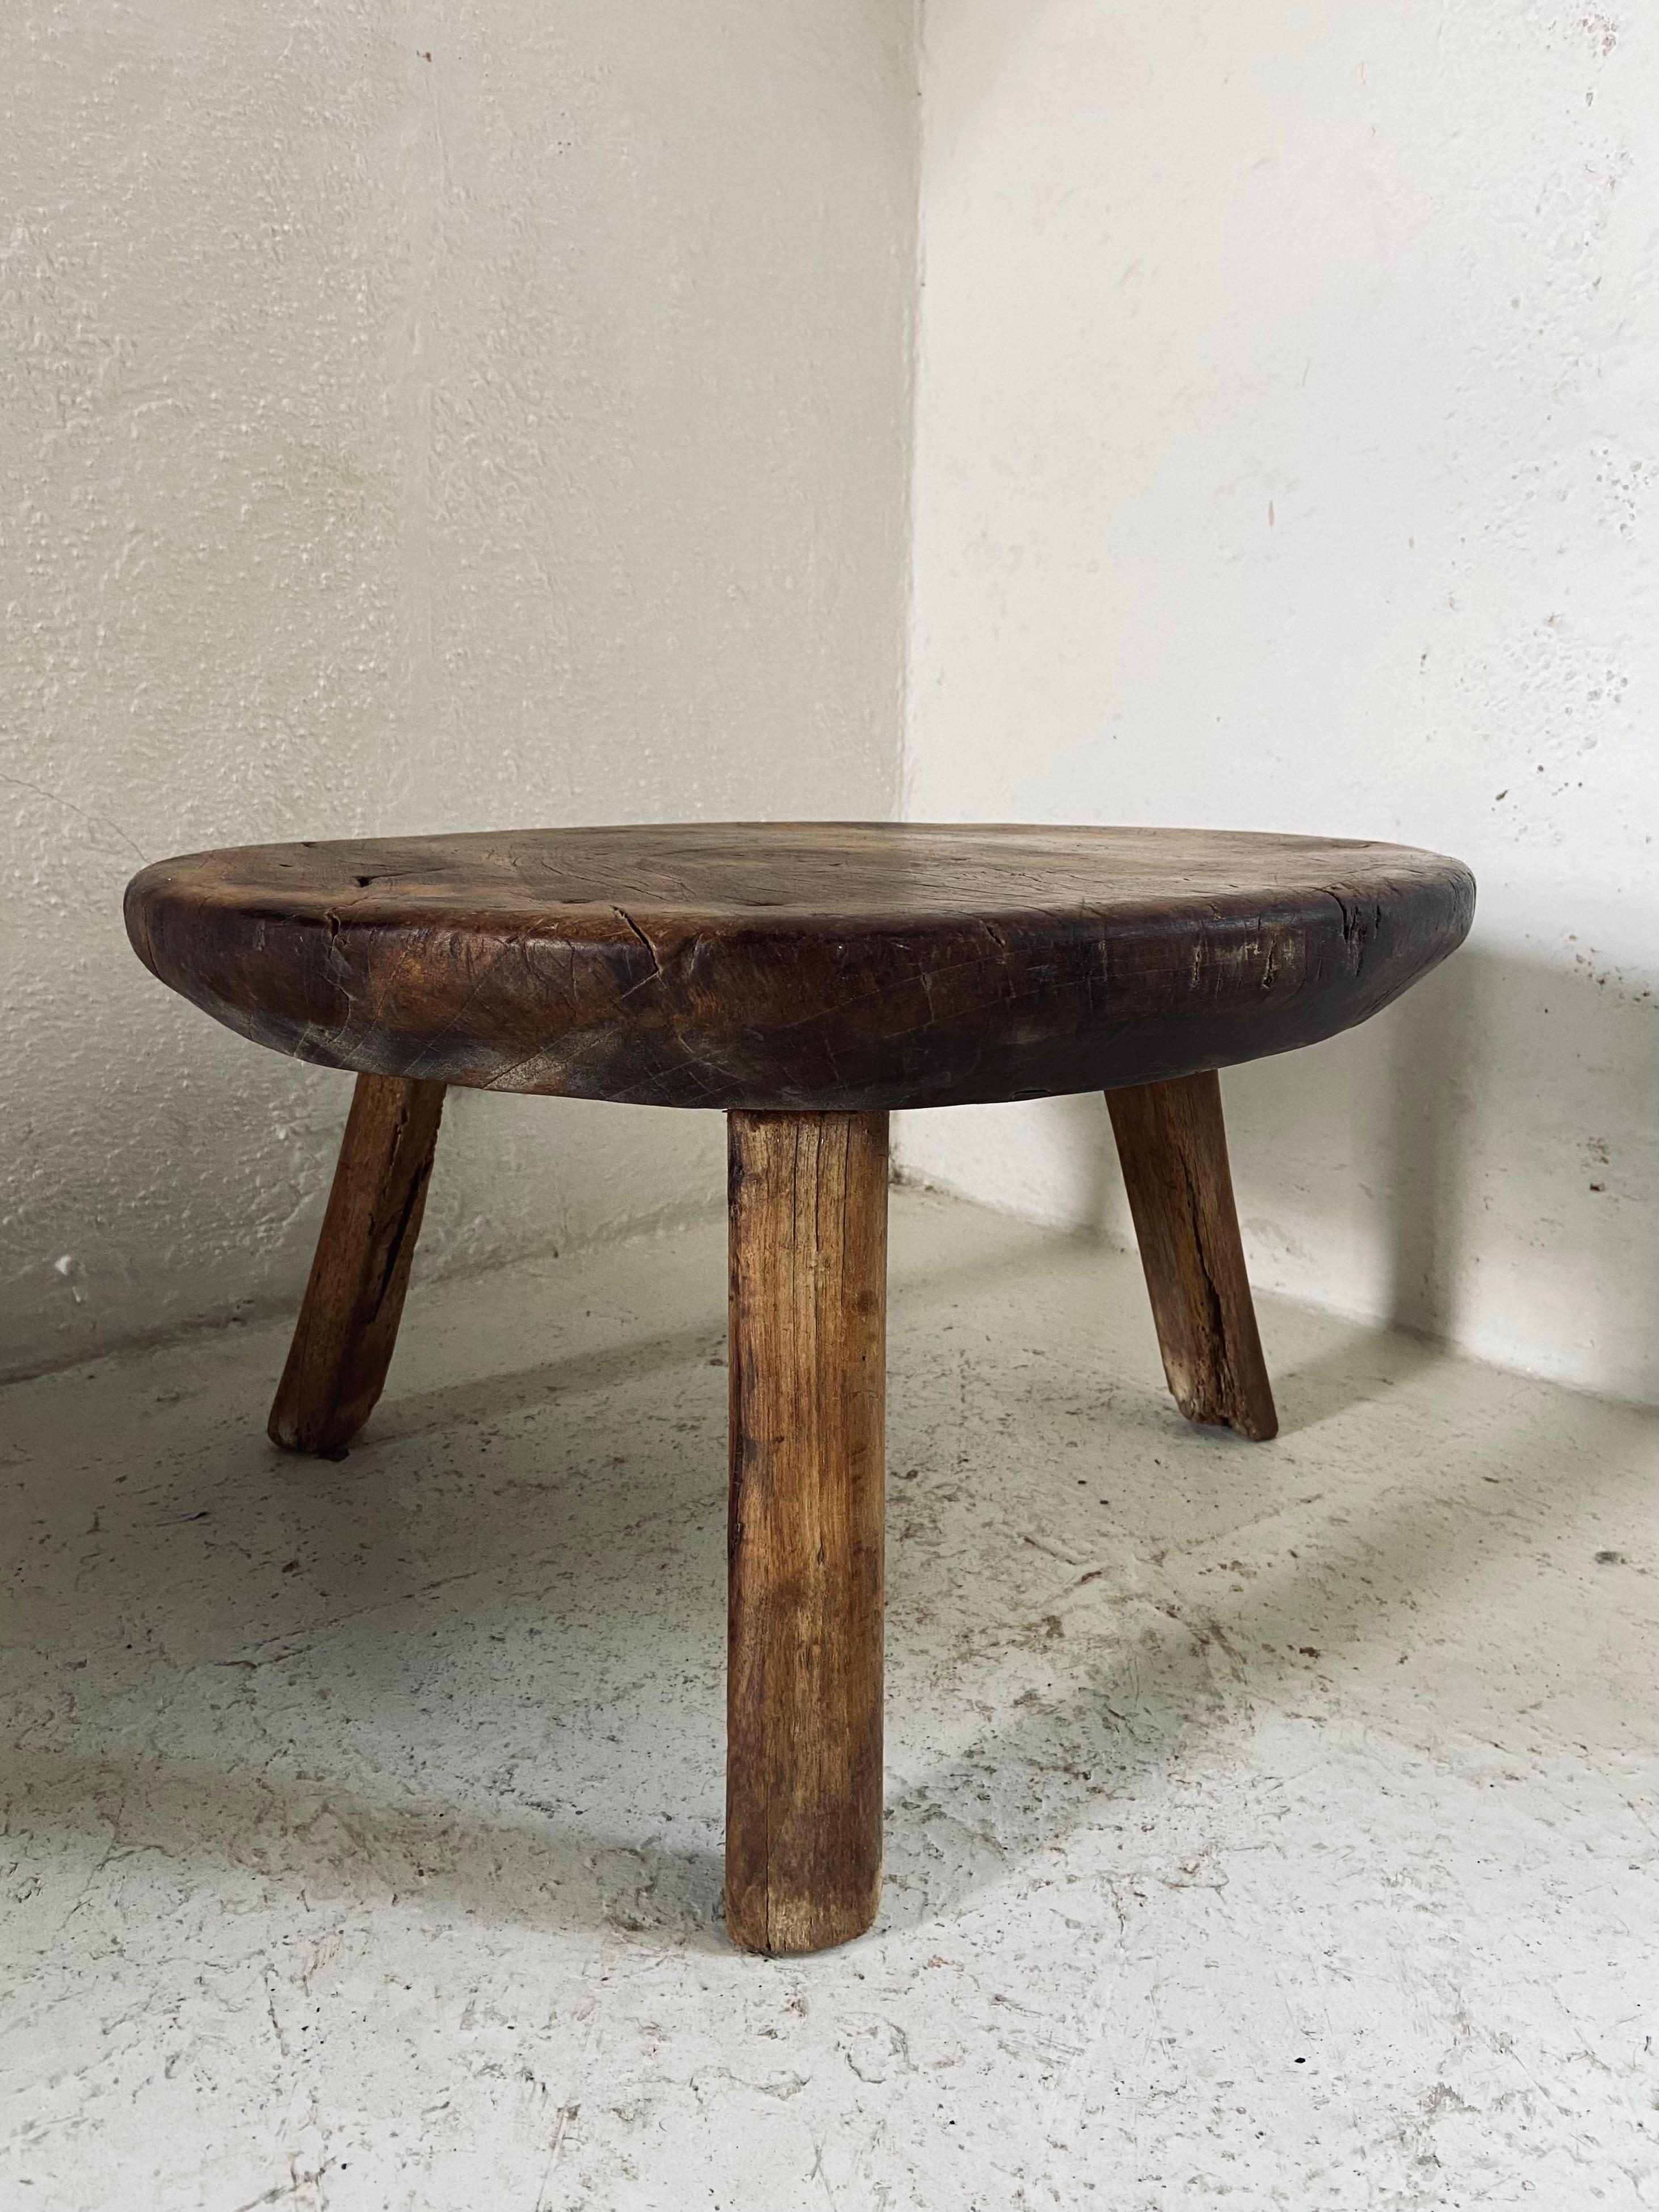 Primitive Hardwood Low Table by Artefakto
Unique piece.
Dimensions: Ø 46 x H 28 cm.
Materials: Hardwood.
Central Yucatan, Mexico 1970 ´s.

Artefakto opened its doors on the Riviera Nayarit coastline in 2010. With an unrelenting passion for all